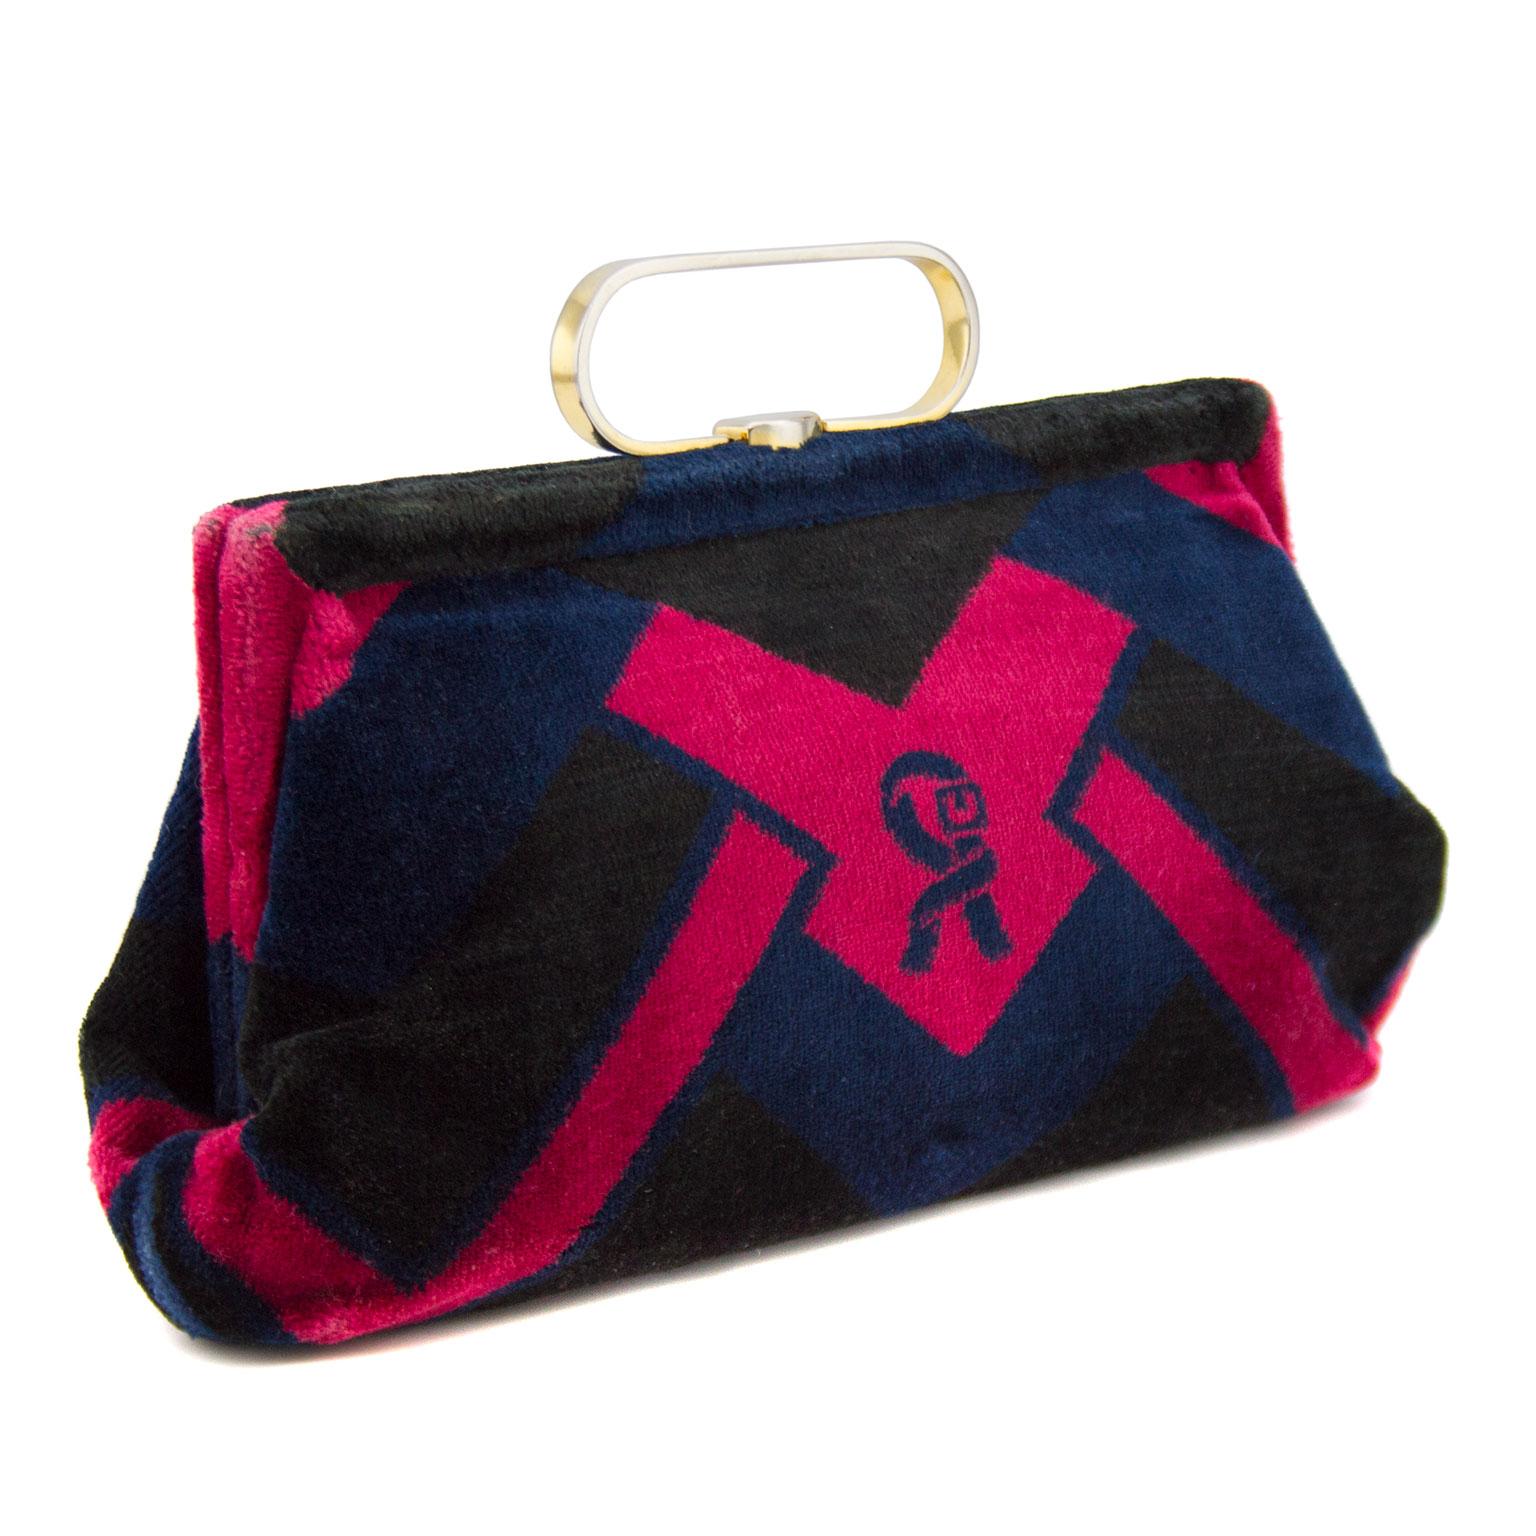 1970s Roberta Di Camerino double top handle bag. Beautiful navy blue and deep raspberry with gold tone hardware. Branded with the iconic buckle 